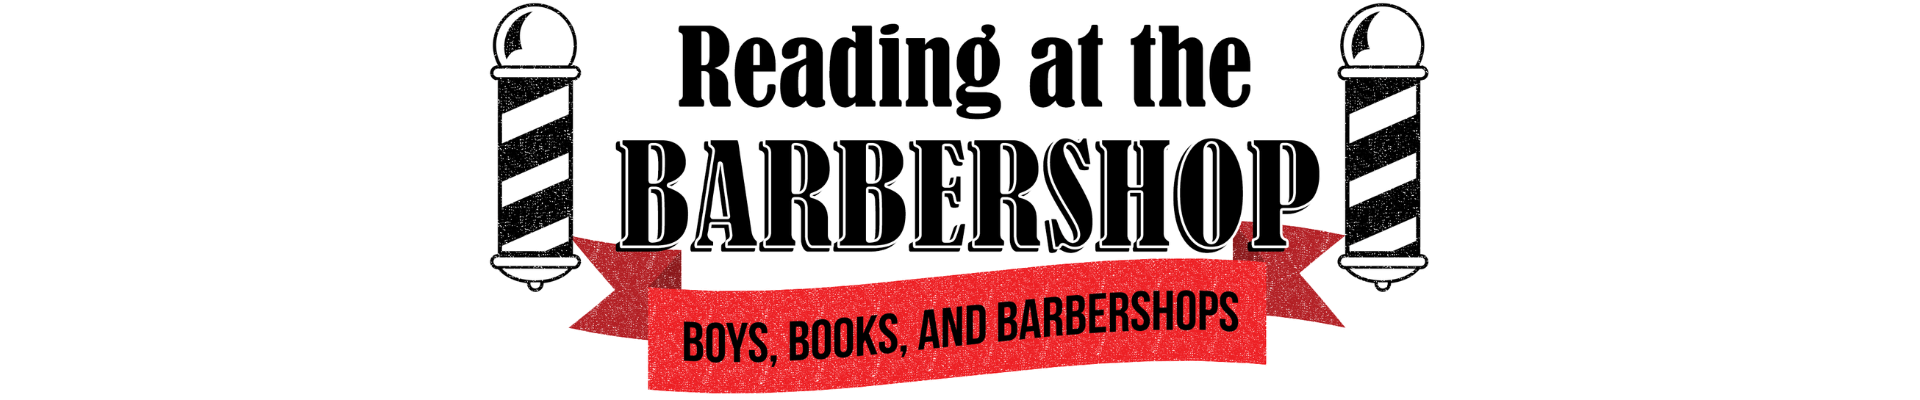 Click button for information on Reading at the Barbershop